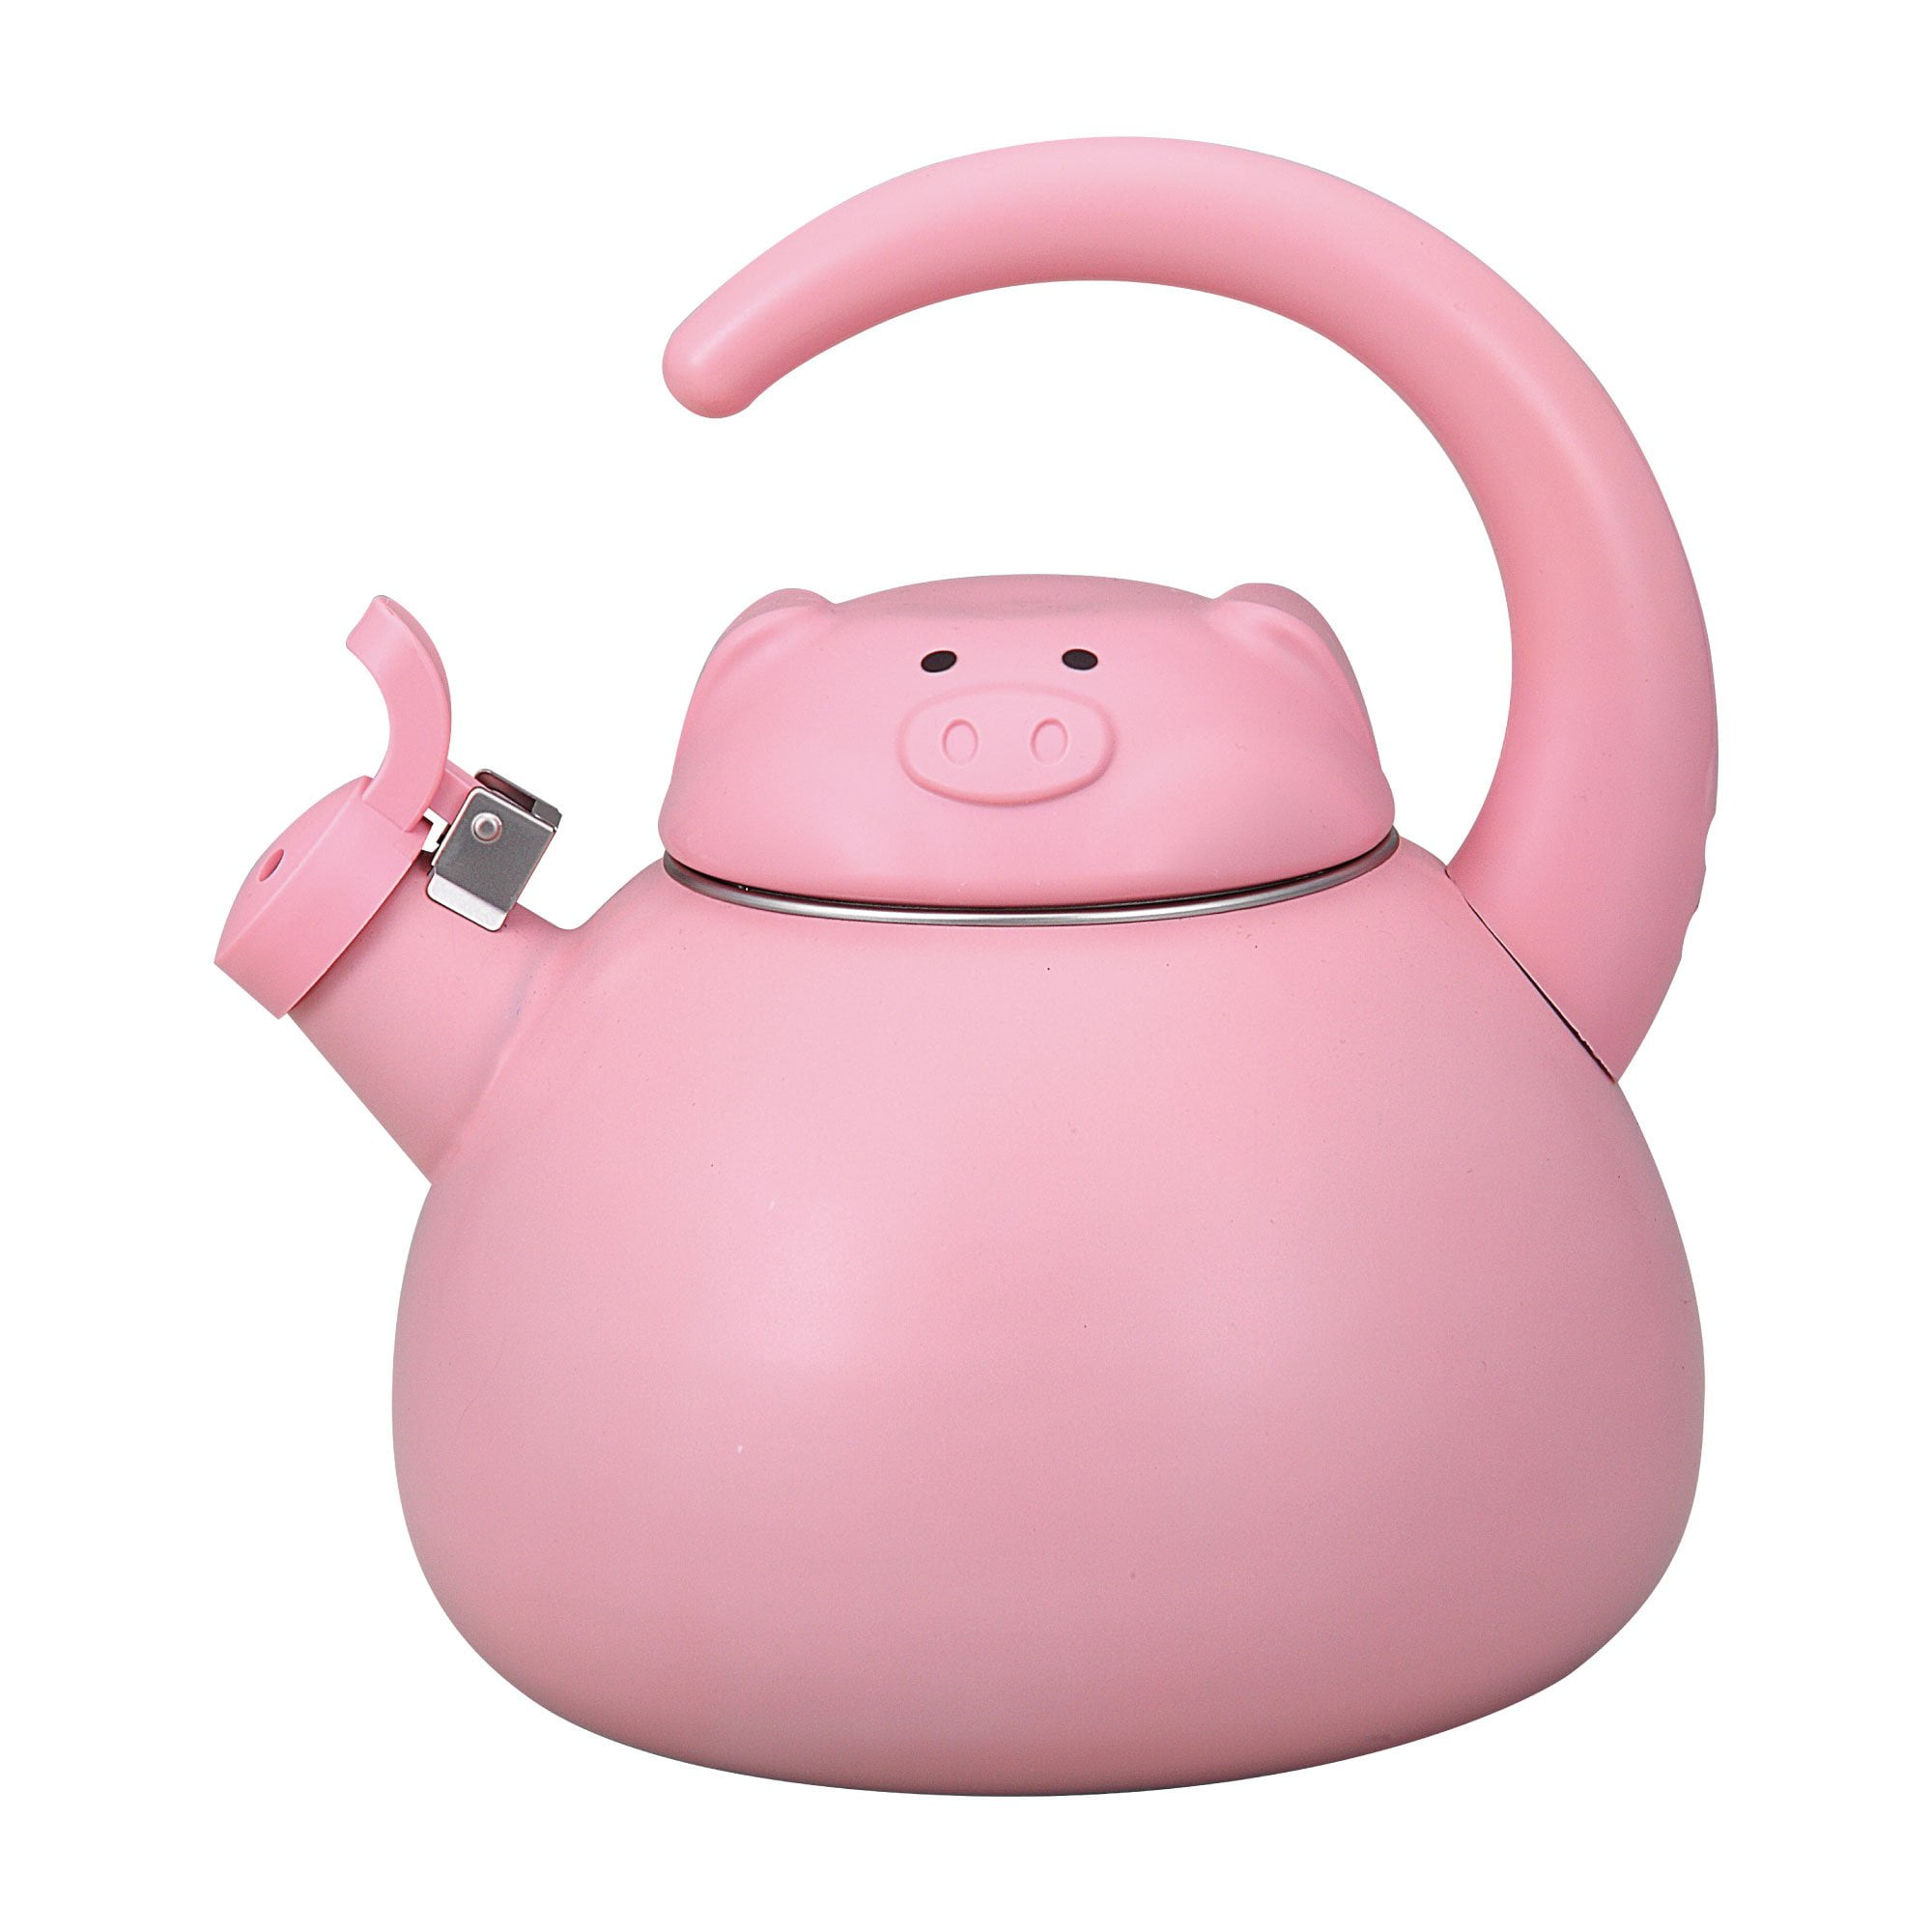 Home-X 8541905038 HOME-X Red Cow Whistling Tea Kettle, Cute